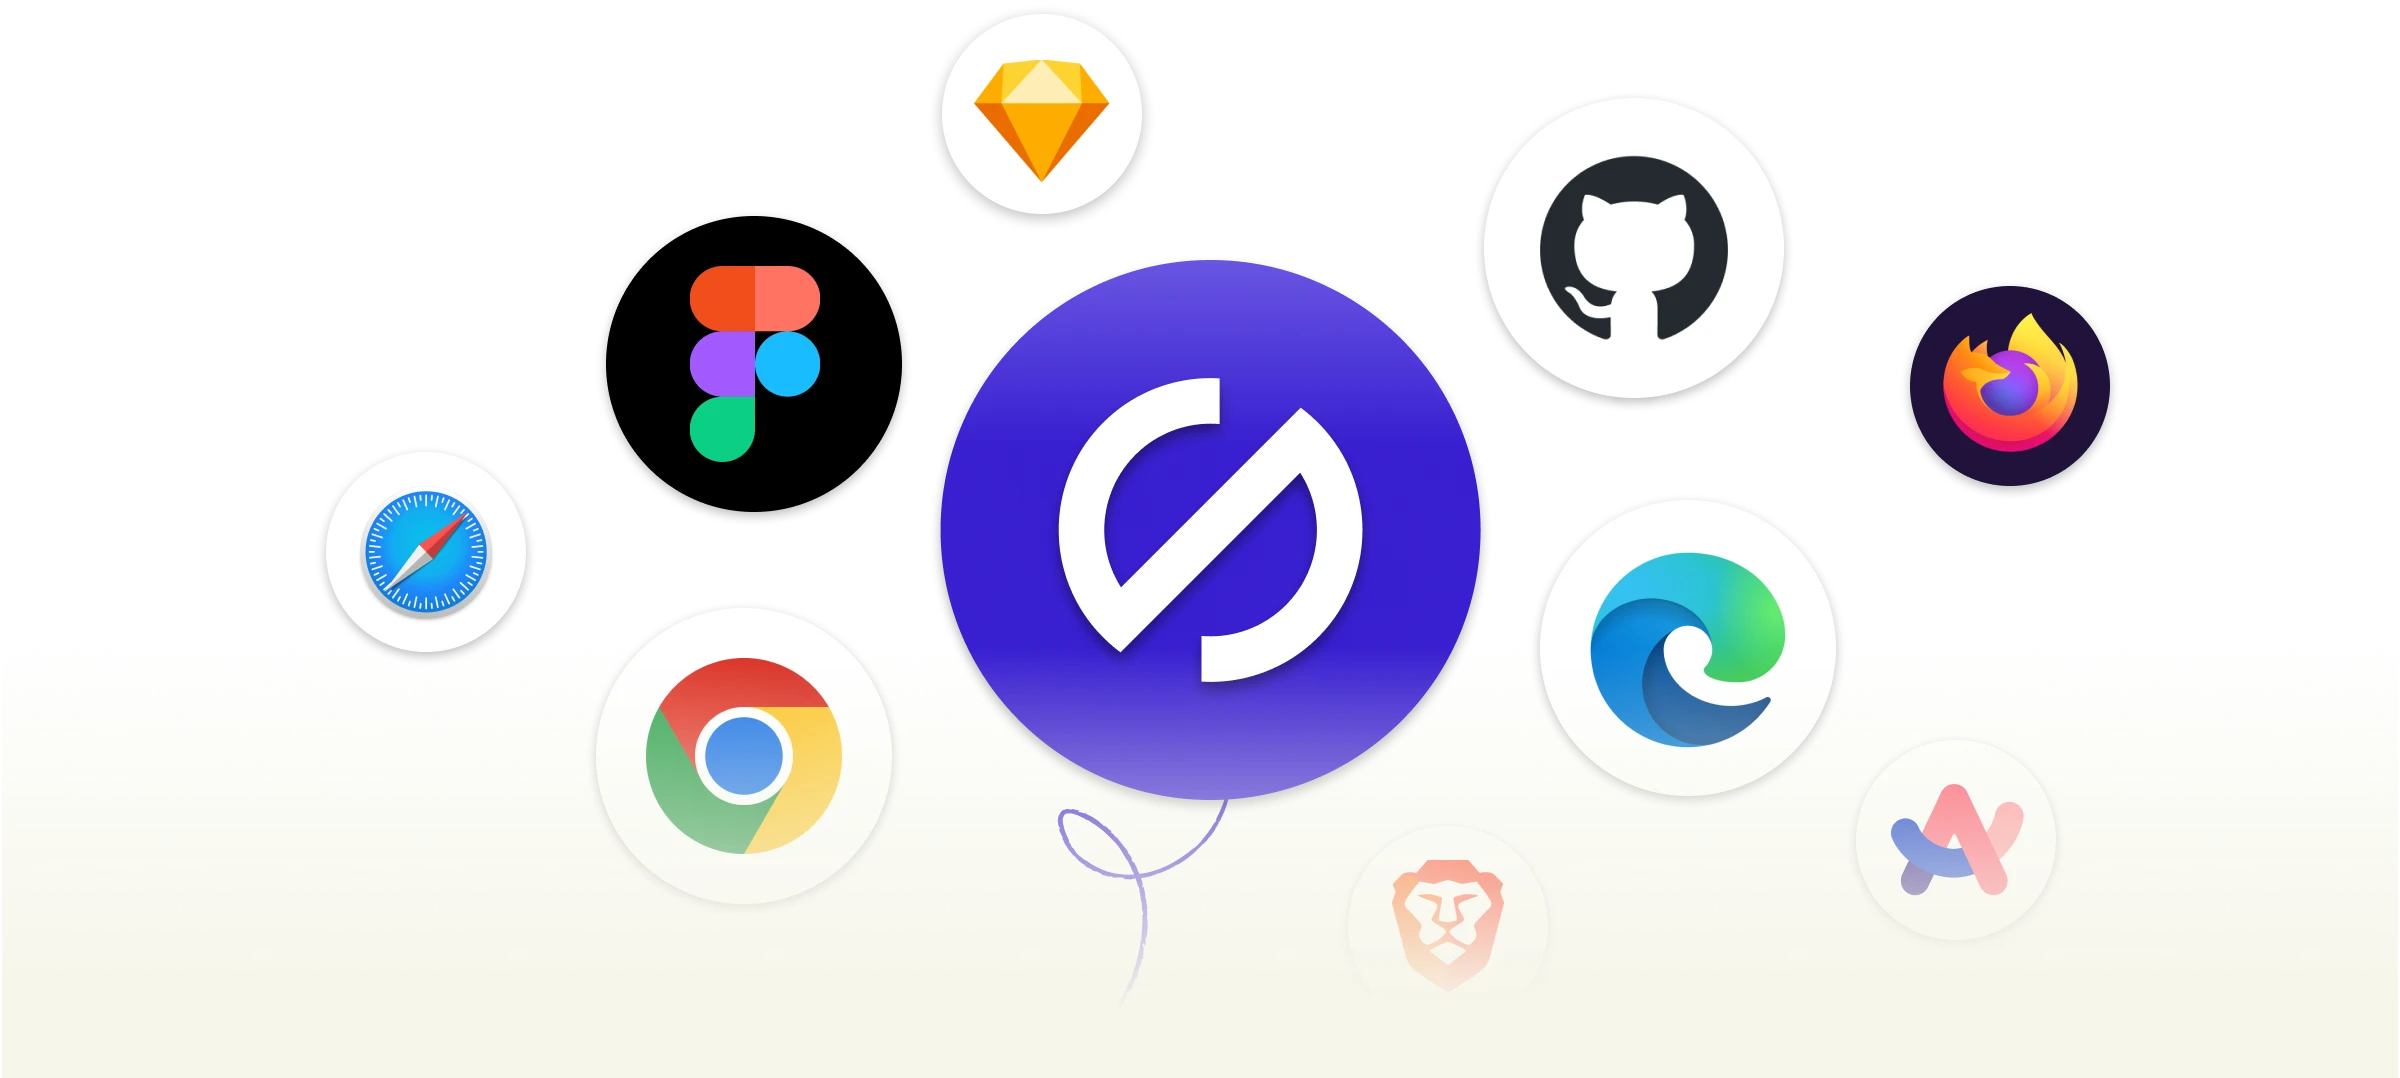 Numerous bubbles of logos with Stark at the center. Surrounding it are logos for design platforms like Sketch and Figma and browsers like Chrome and Edge.